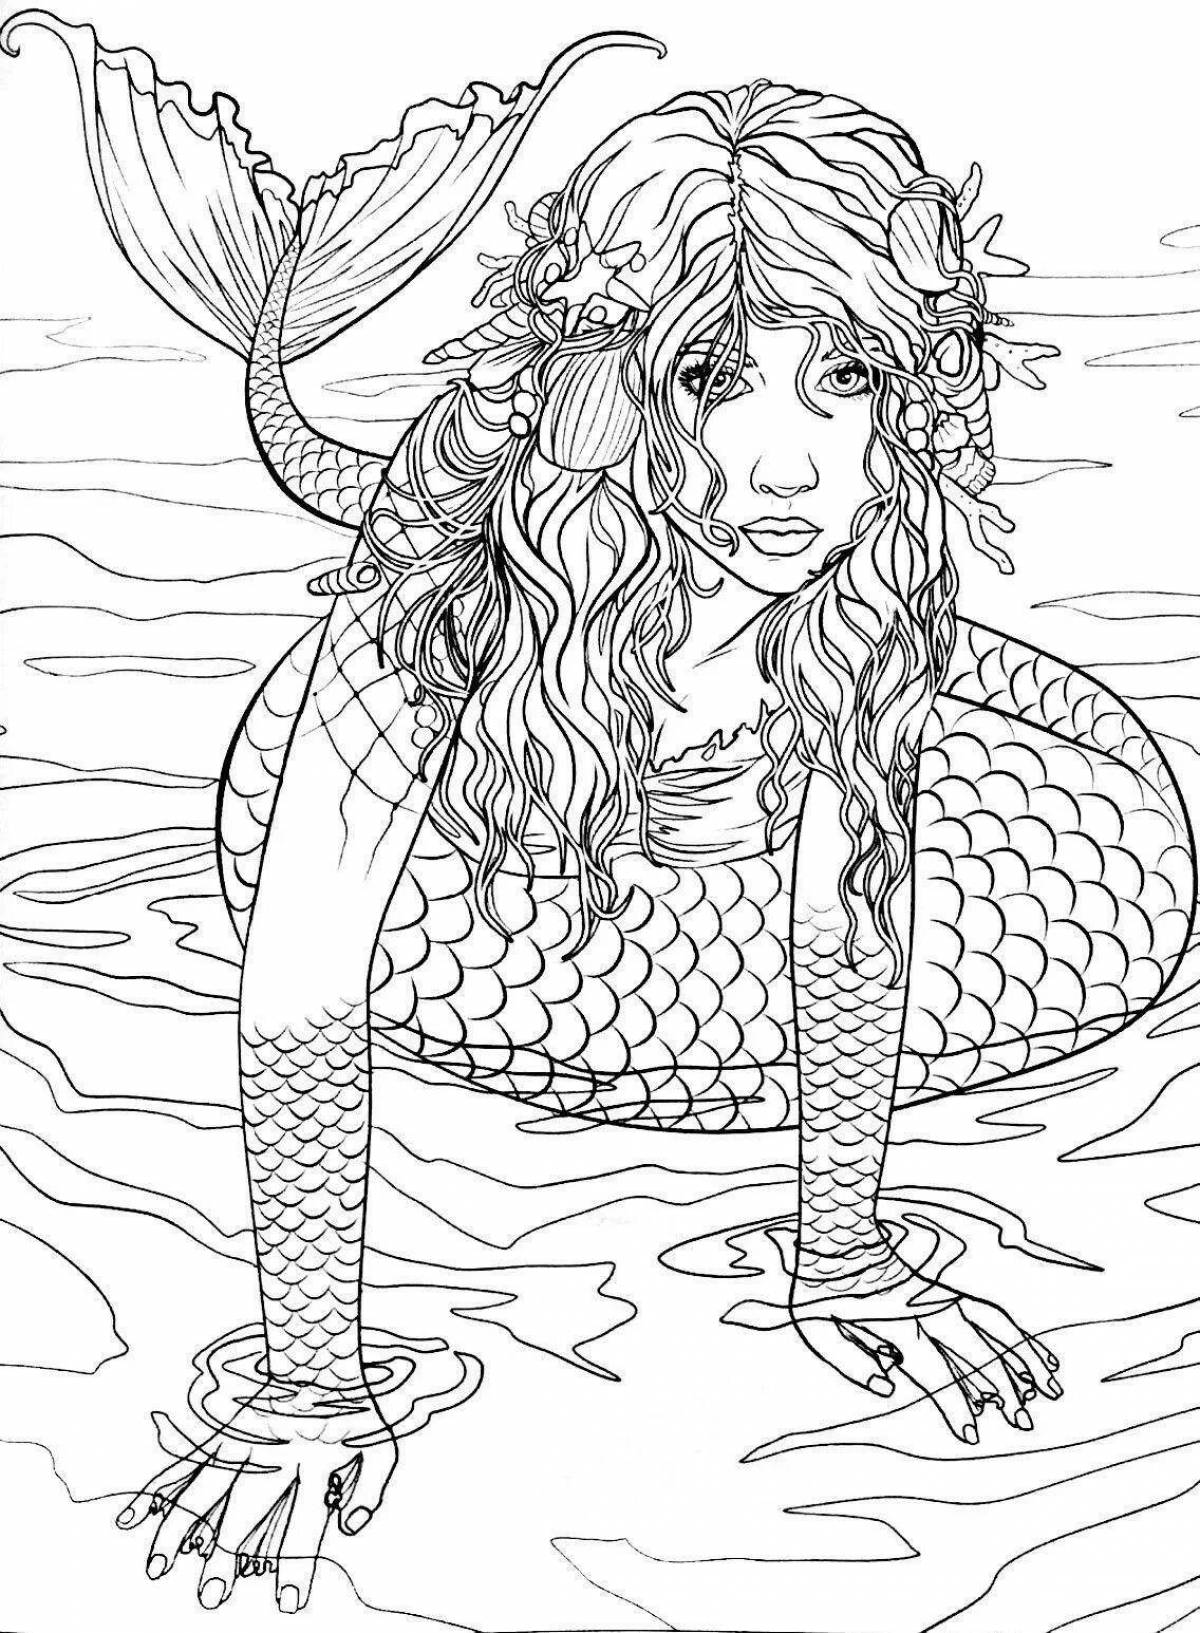 Radiant coloring page mermaid complex